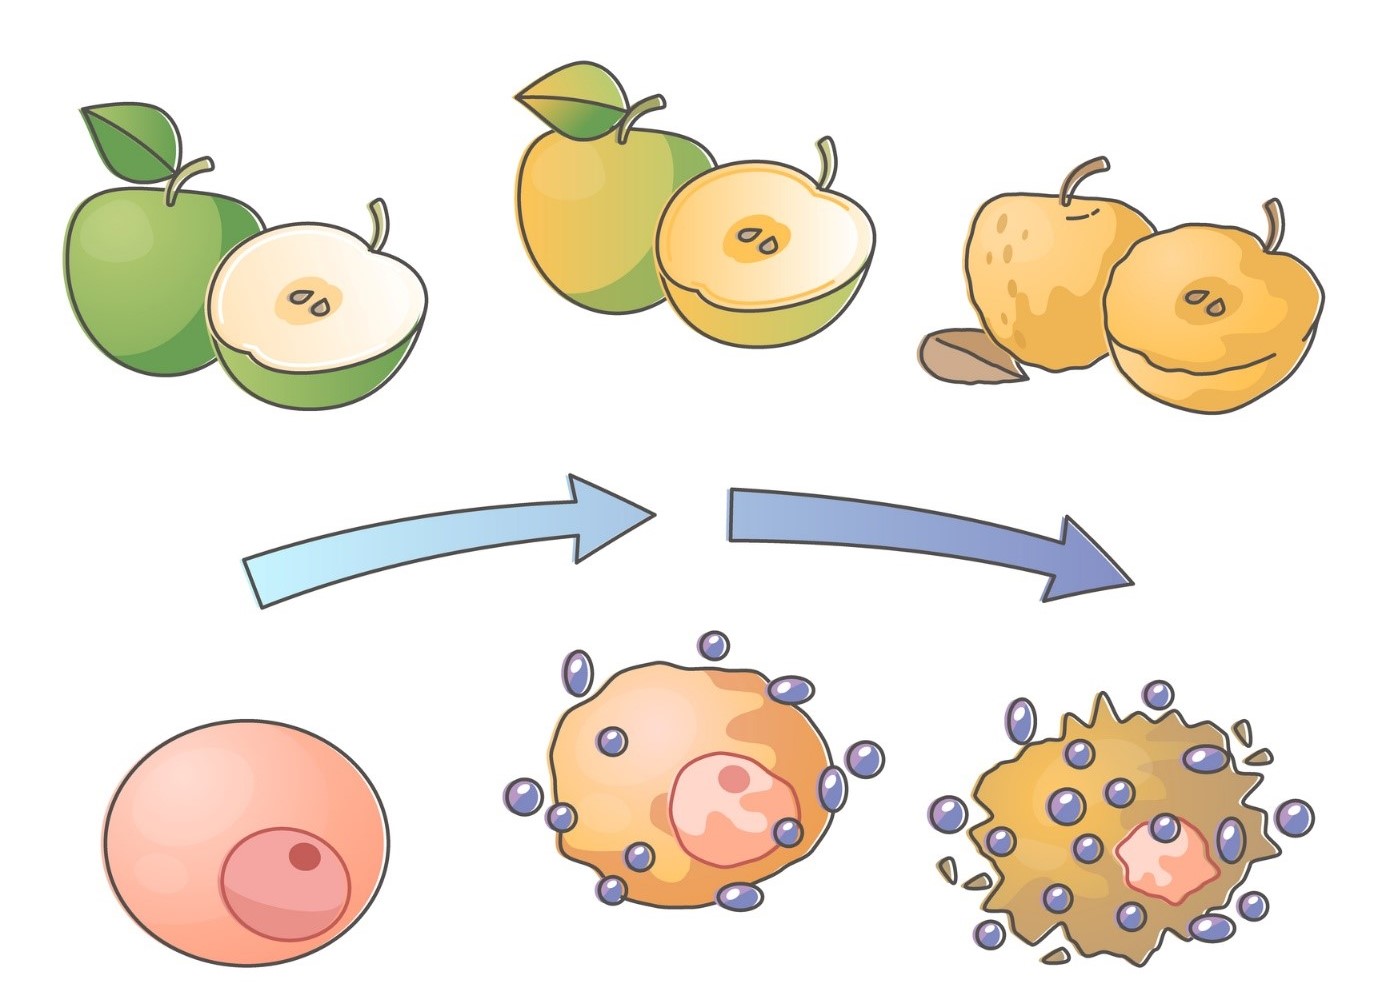 Oxidative stress - illustration of apple and cell decay